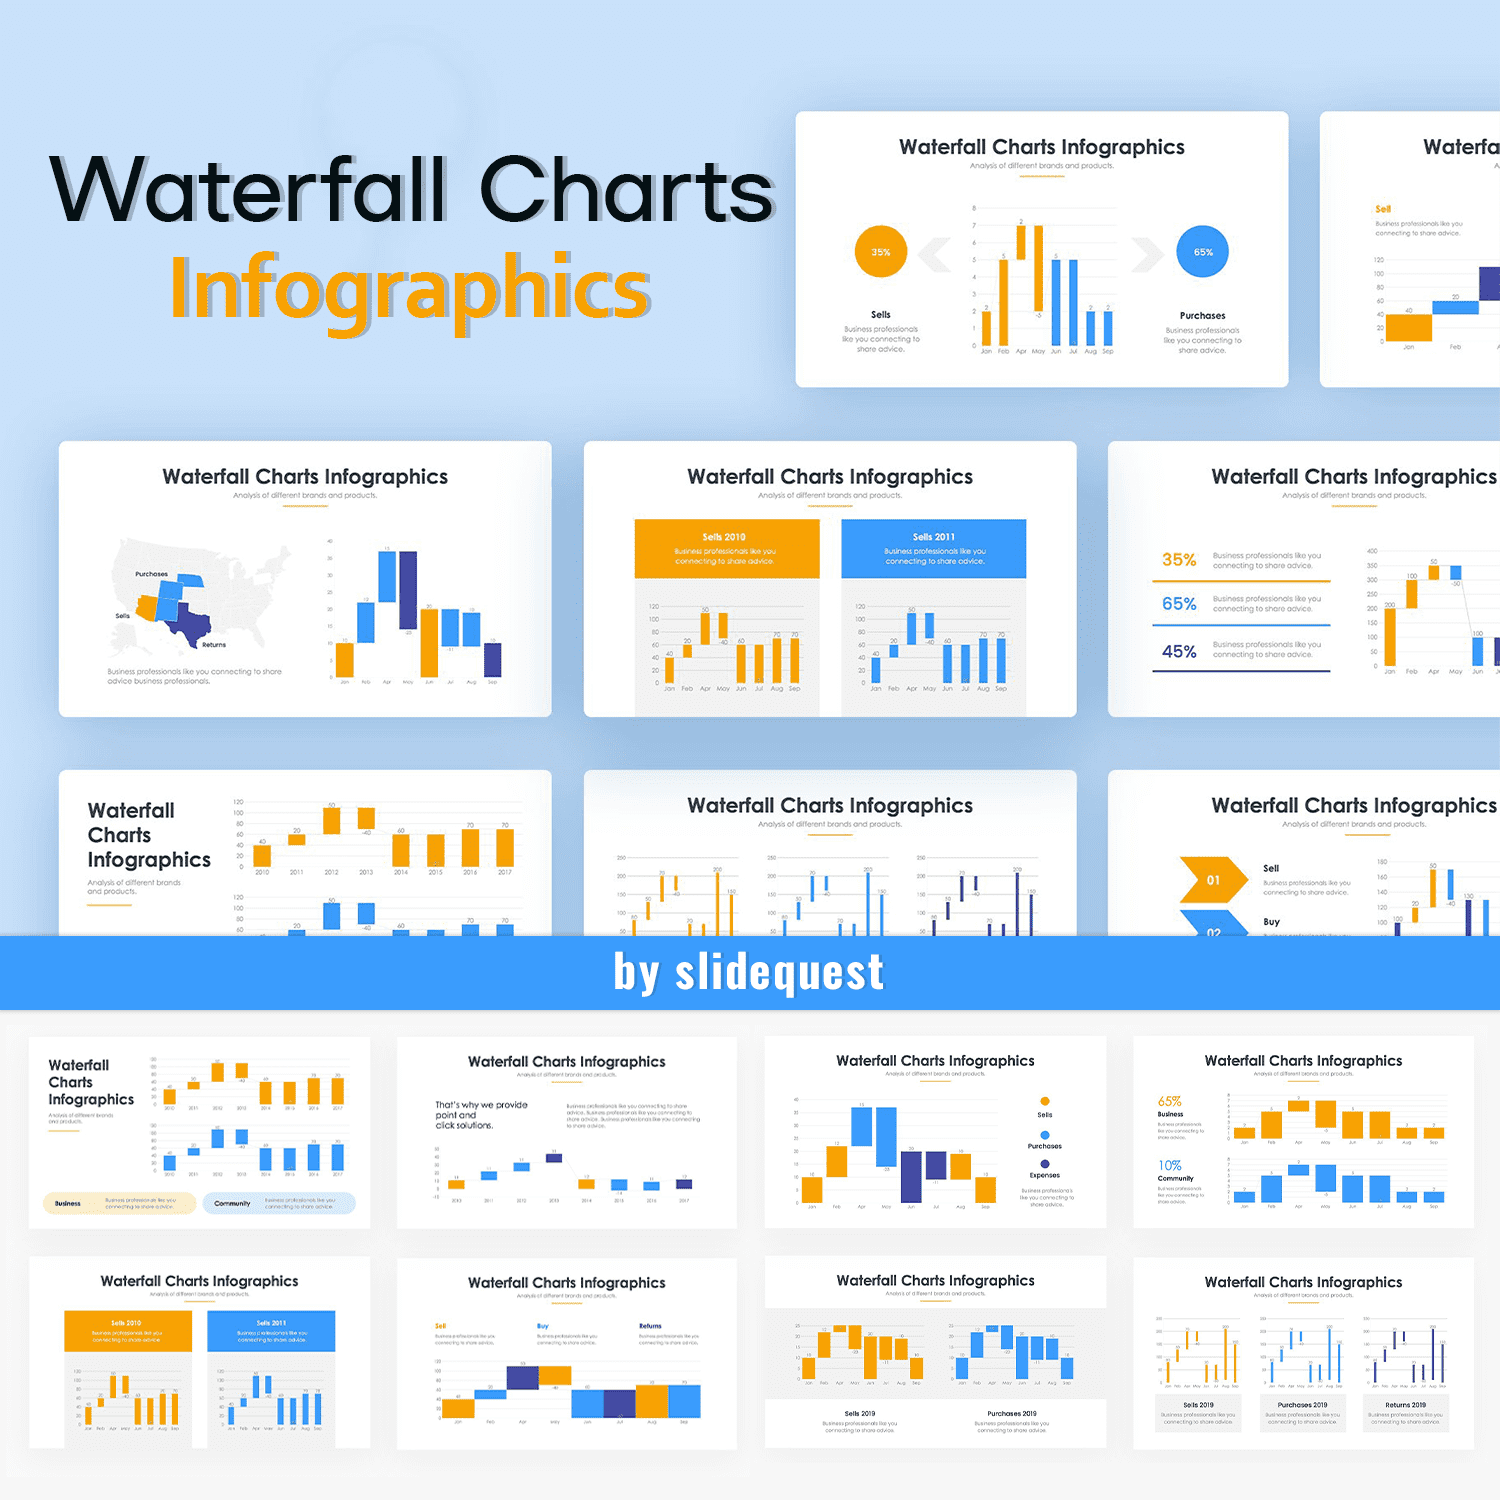 Waterfall Charts Infographics cover image.